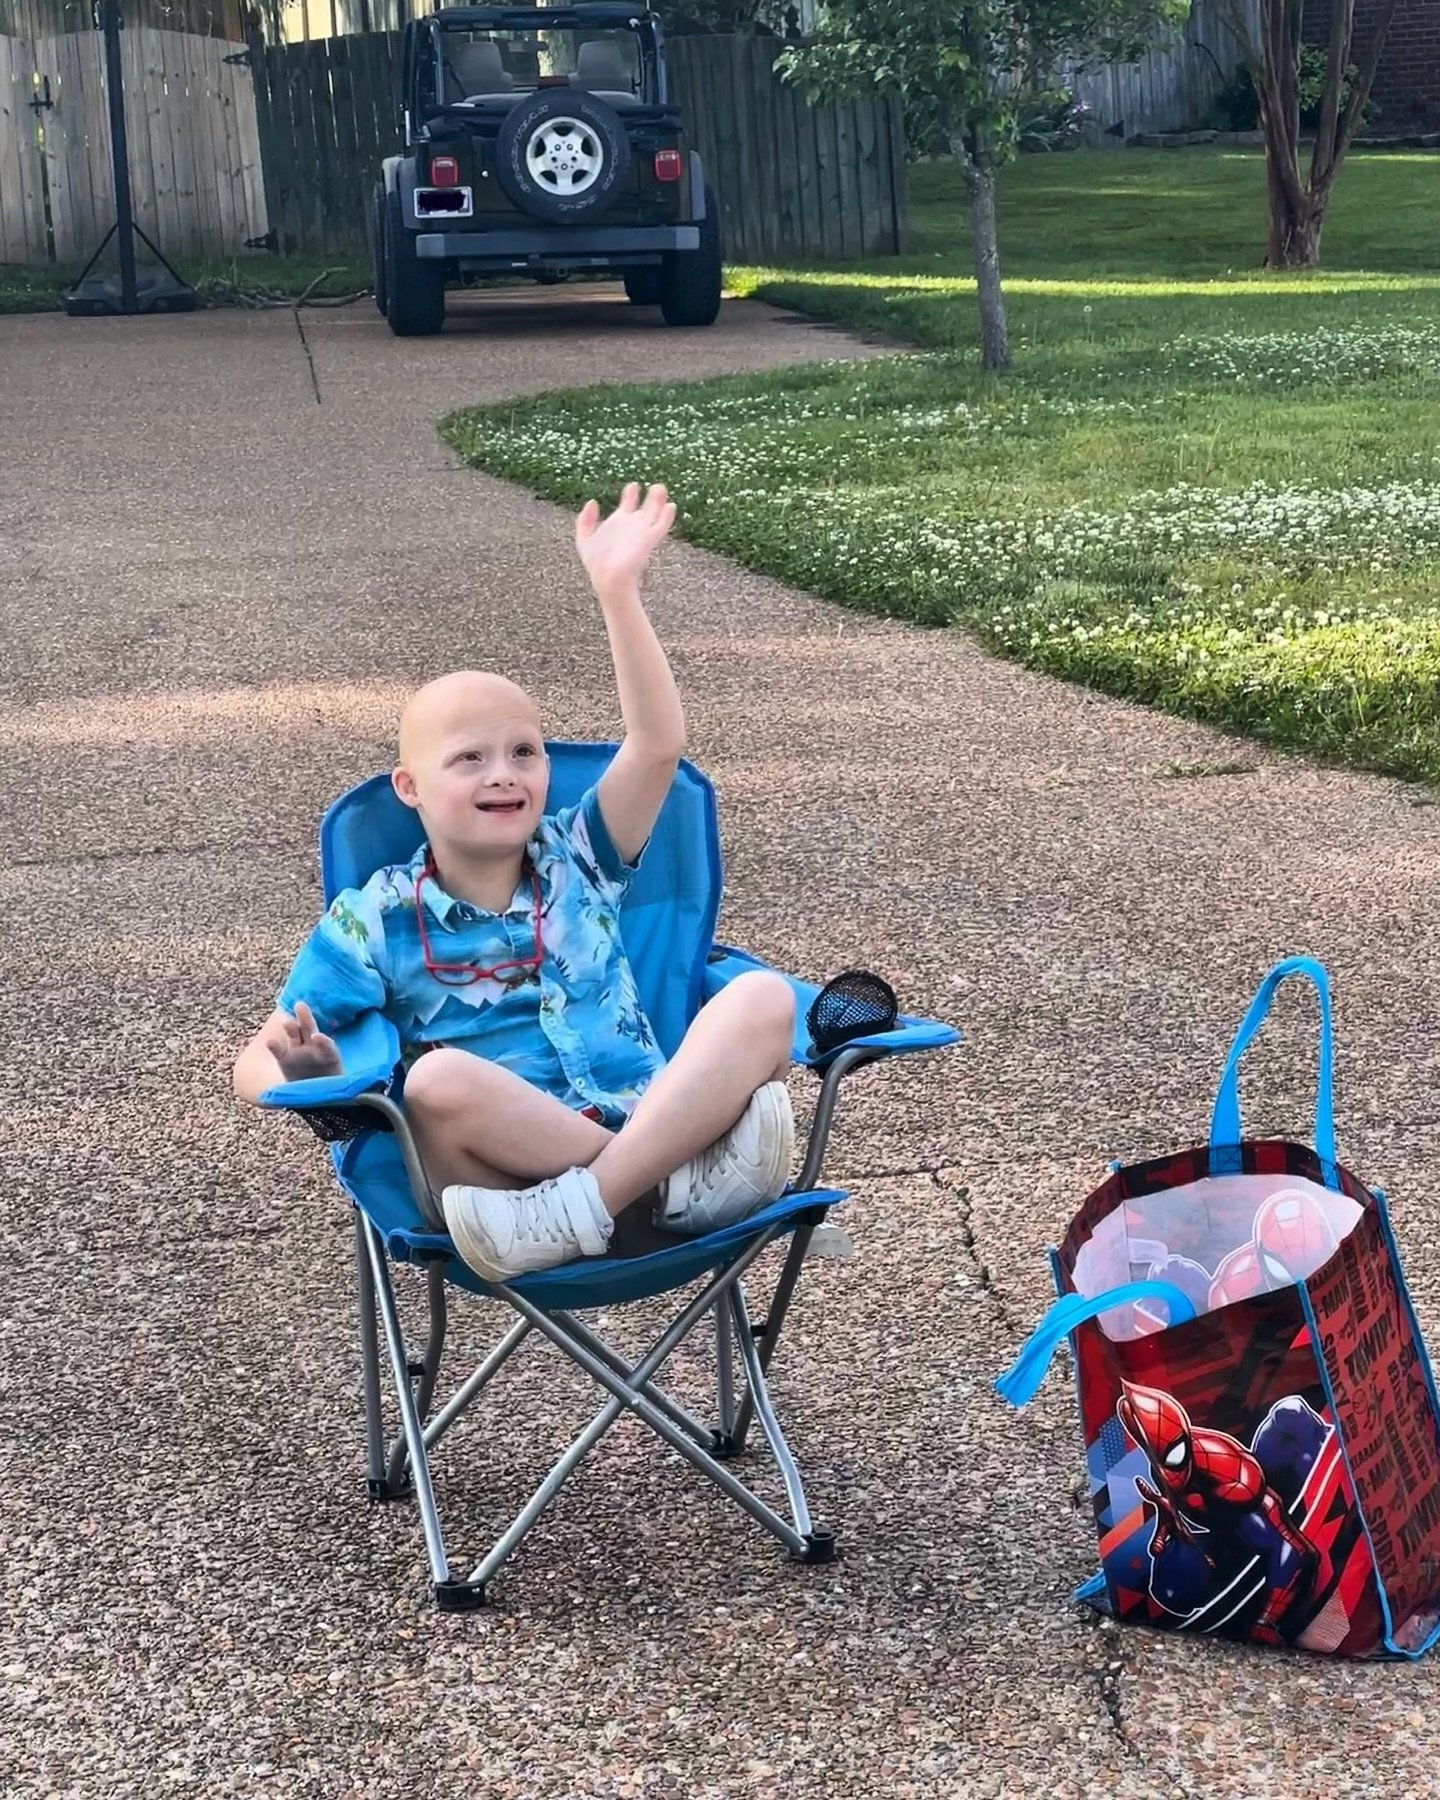 👋🏼 Michael greeting the birds as we wait for the bus this morning. &ldquo;Hi, birdies!&rdquo; 

#michaelaaronshust 
#downsyndrome 
#alopecia